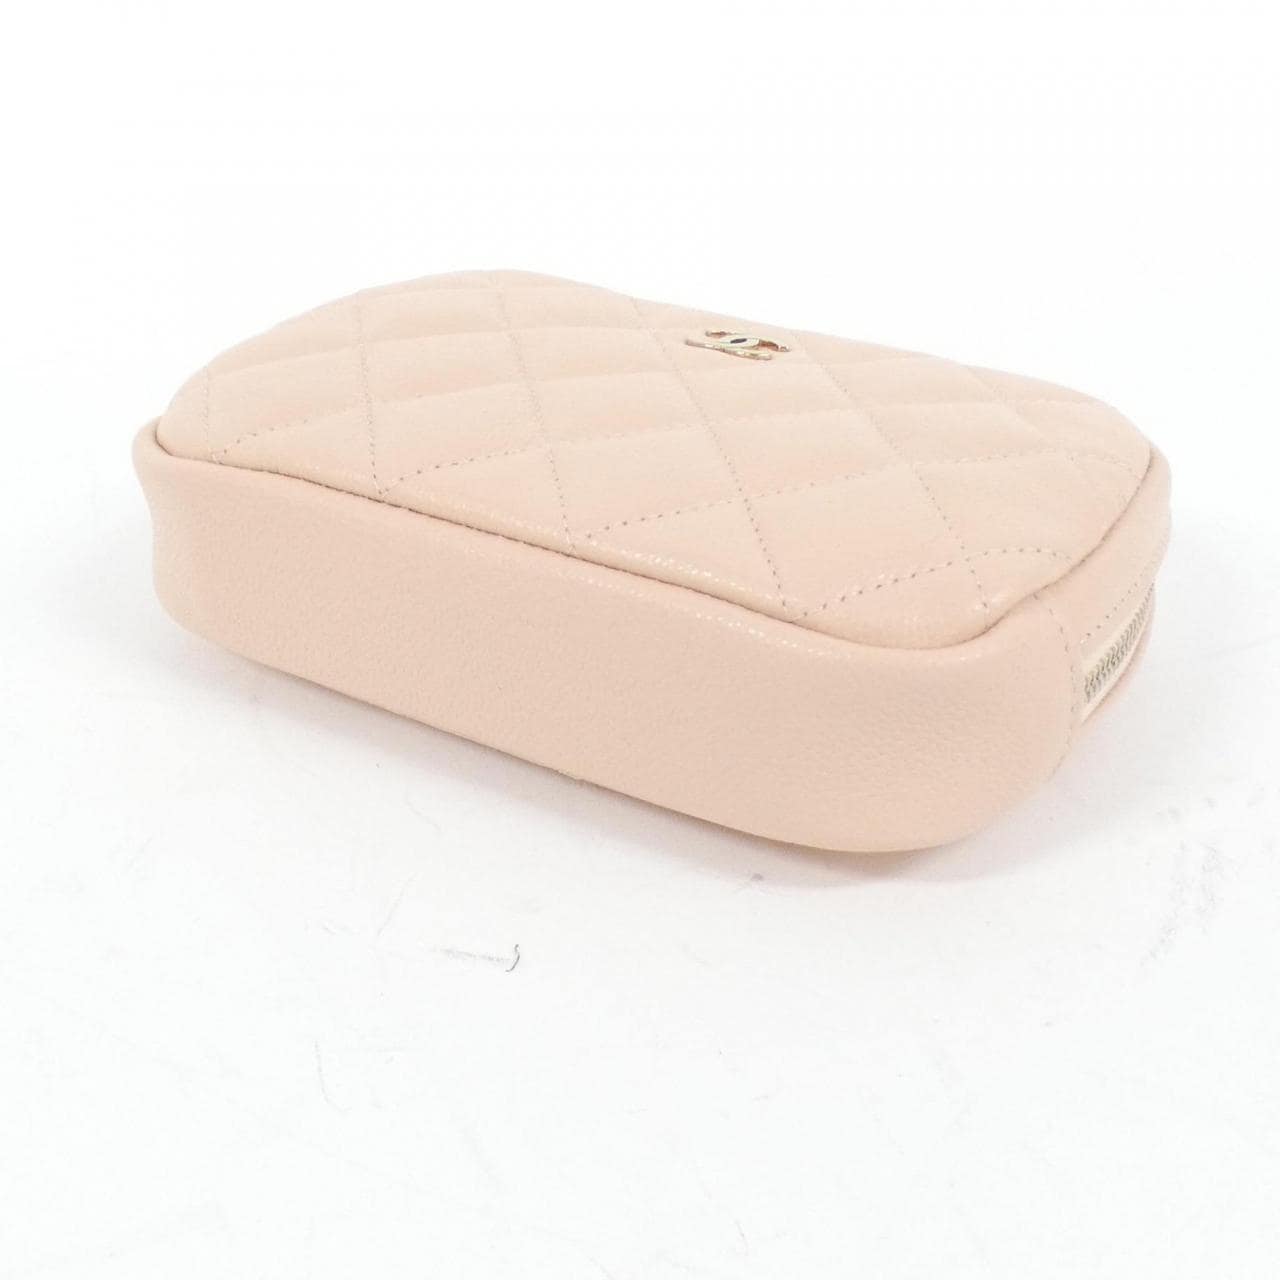 CHANEL Timeless Classic Line 80909 Pouch